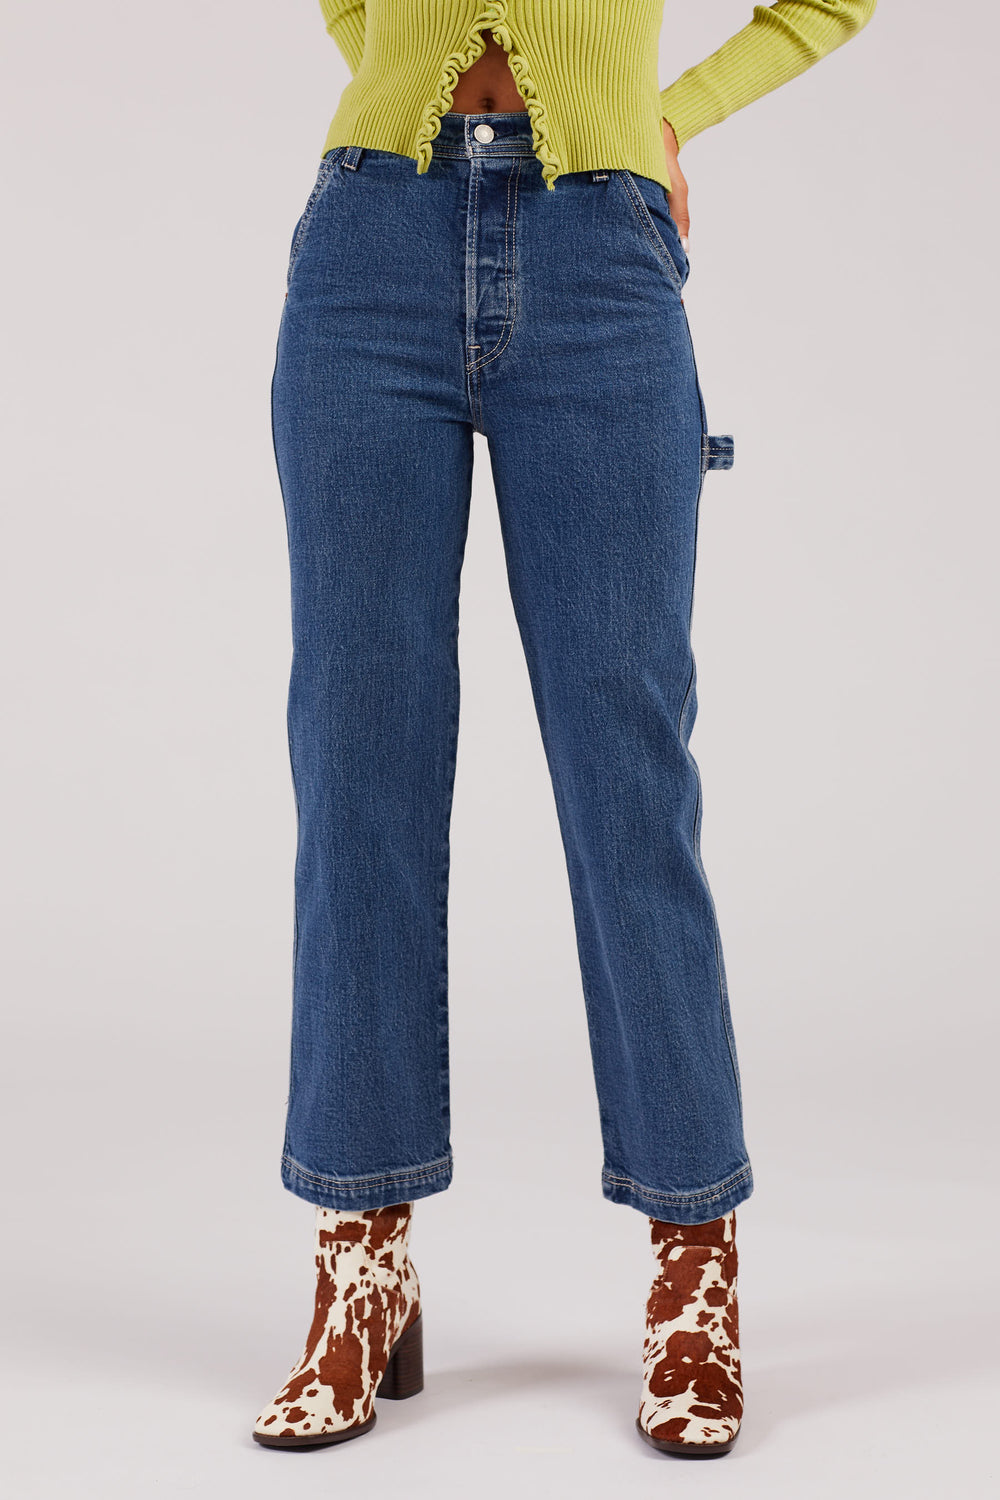 Nine To Five Ribcage Utility Jeans